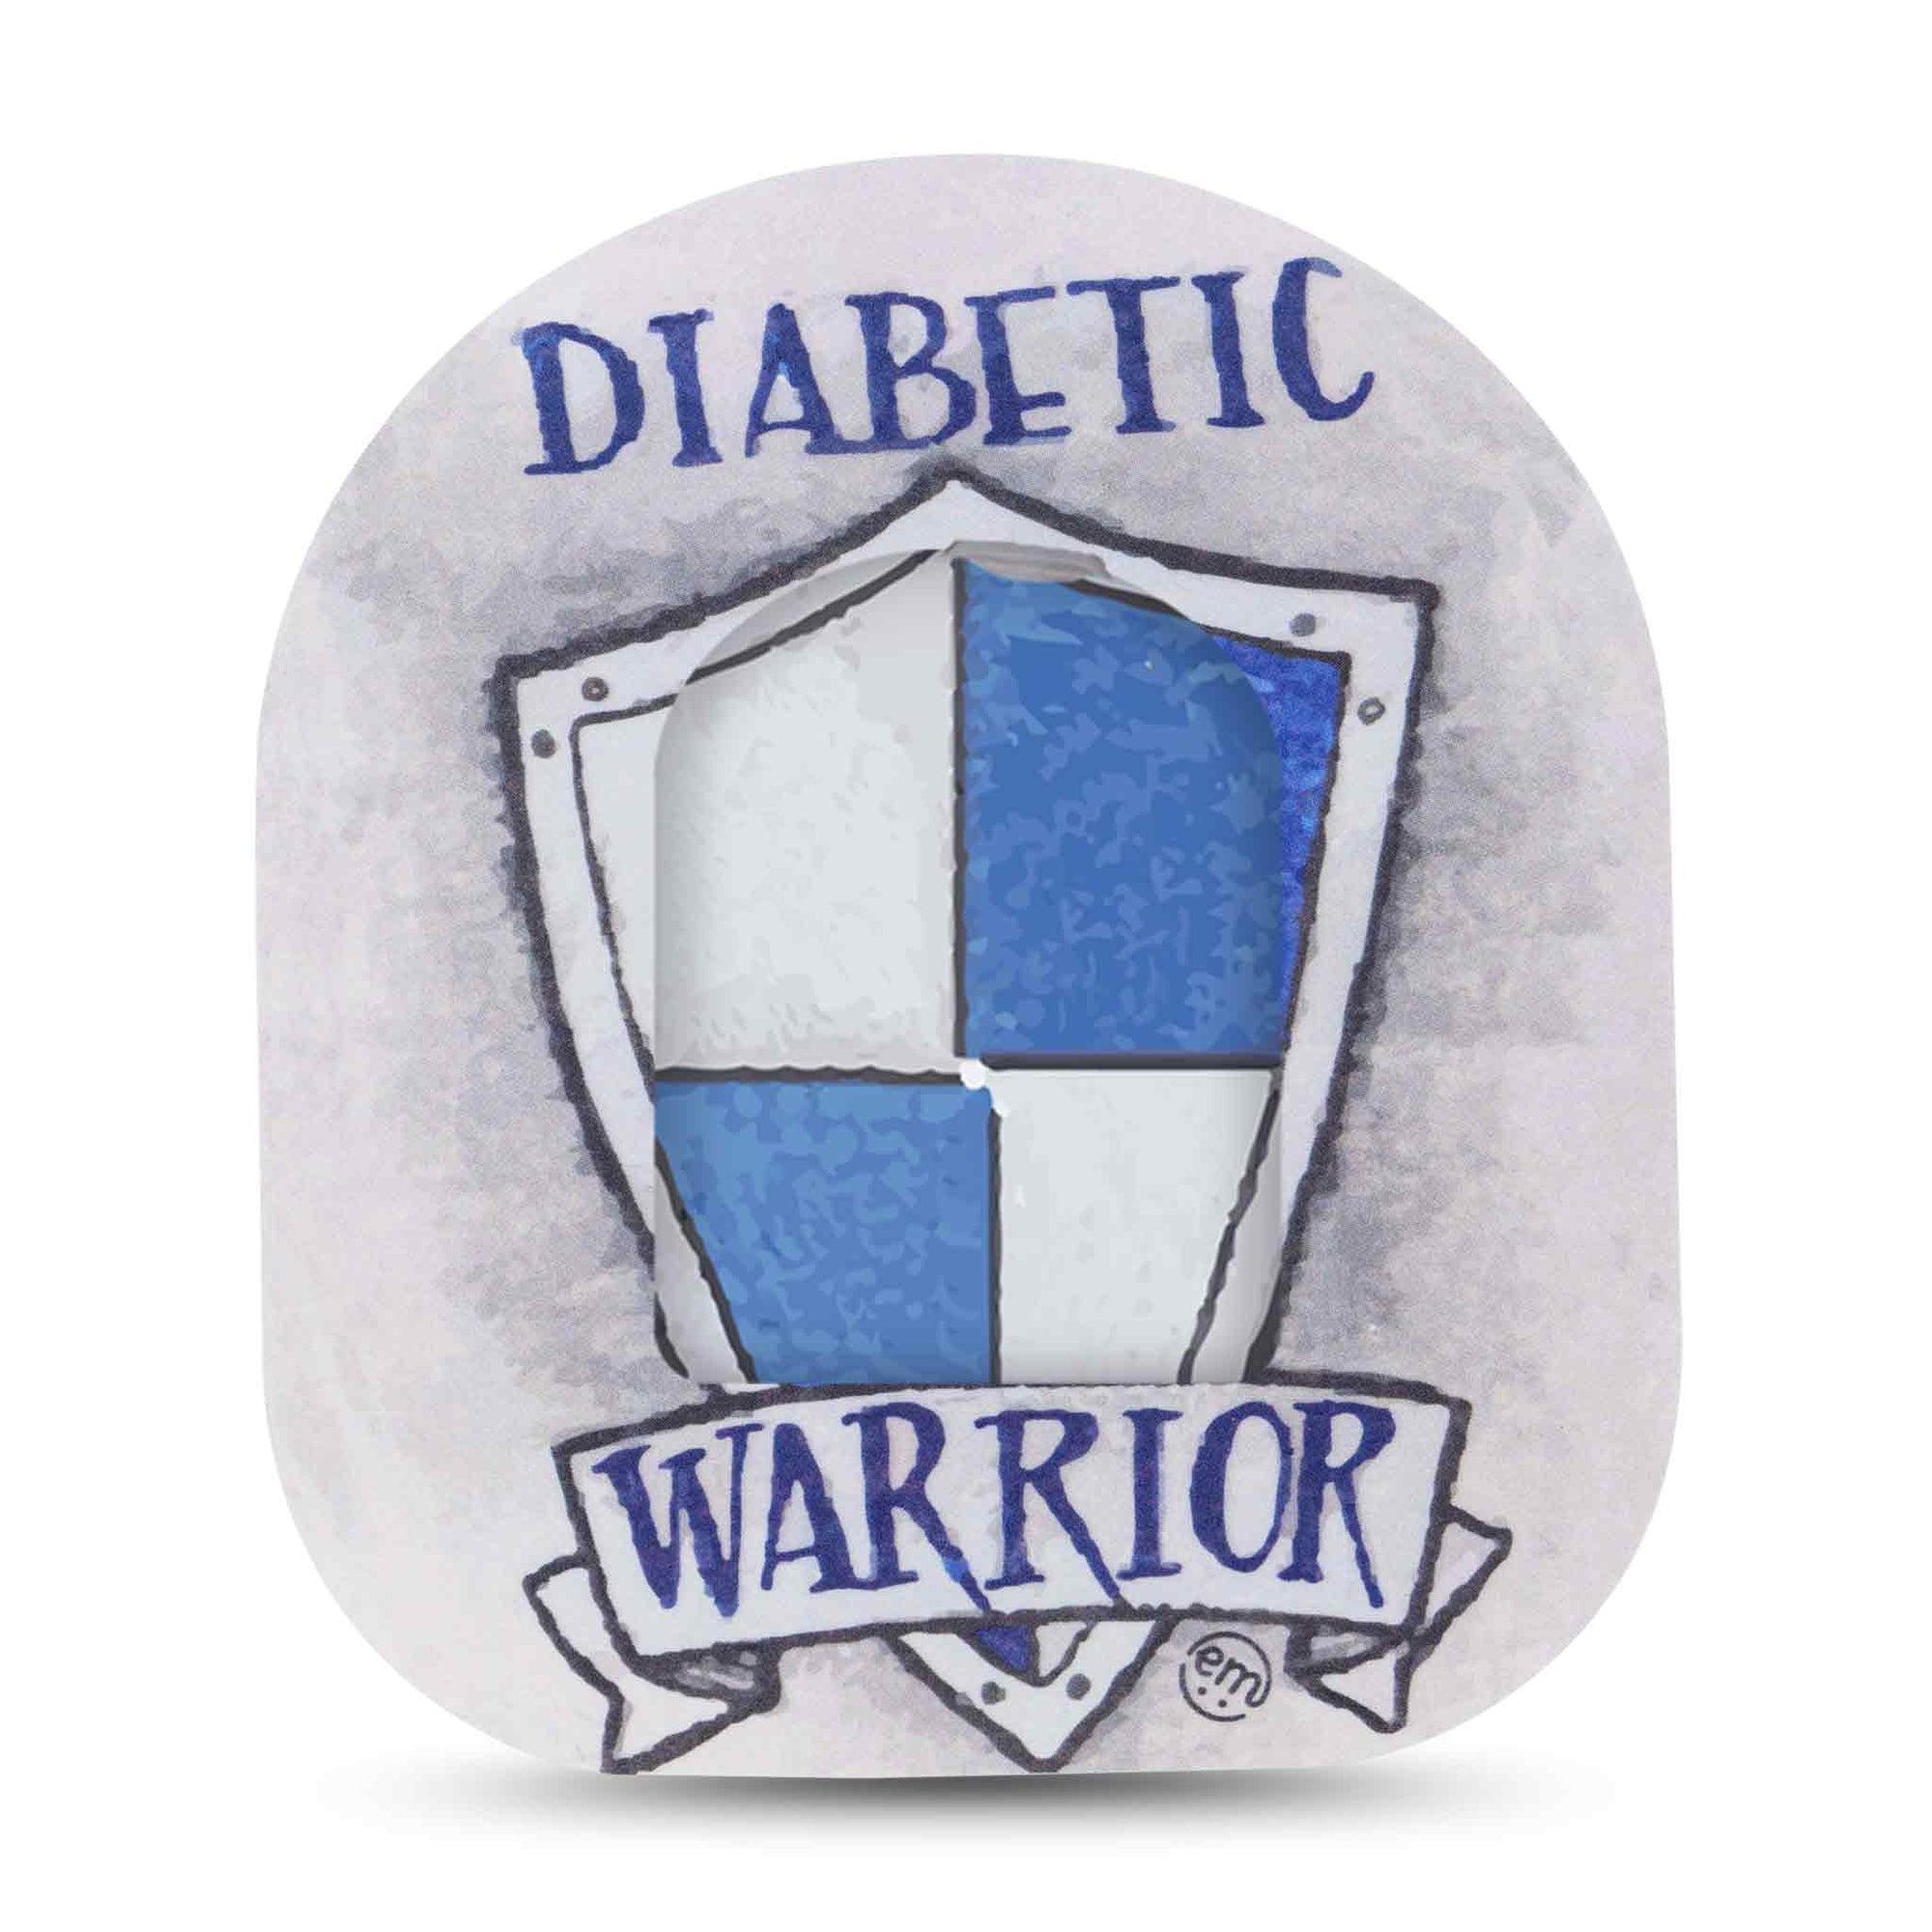 ExpressionMed Diabetic Warrior Omnipod Surface Center Sticker and Mini Tape Health Defender Vinyl Sticker and Tape Design Pump Design